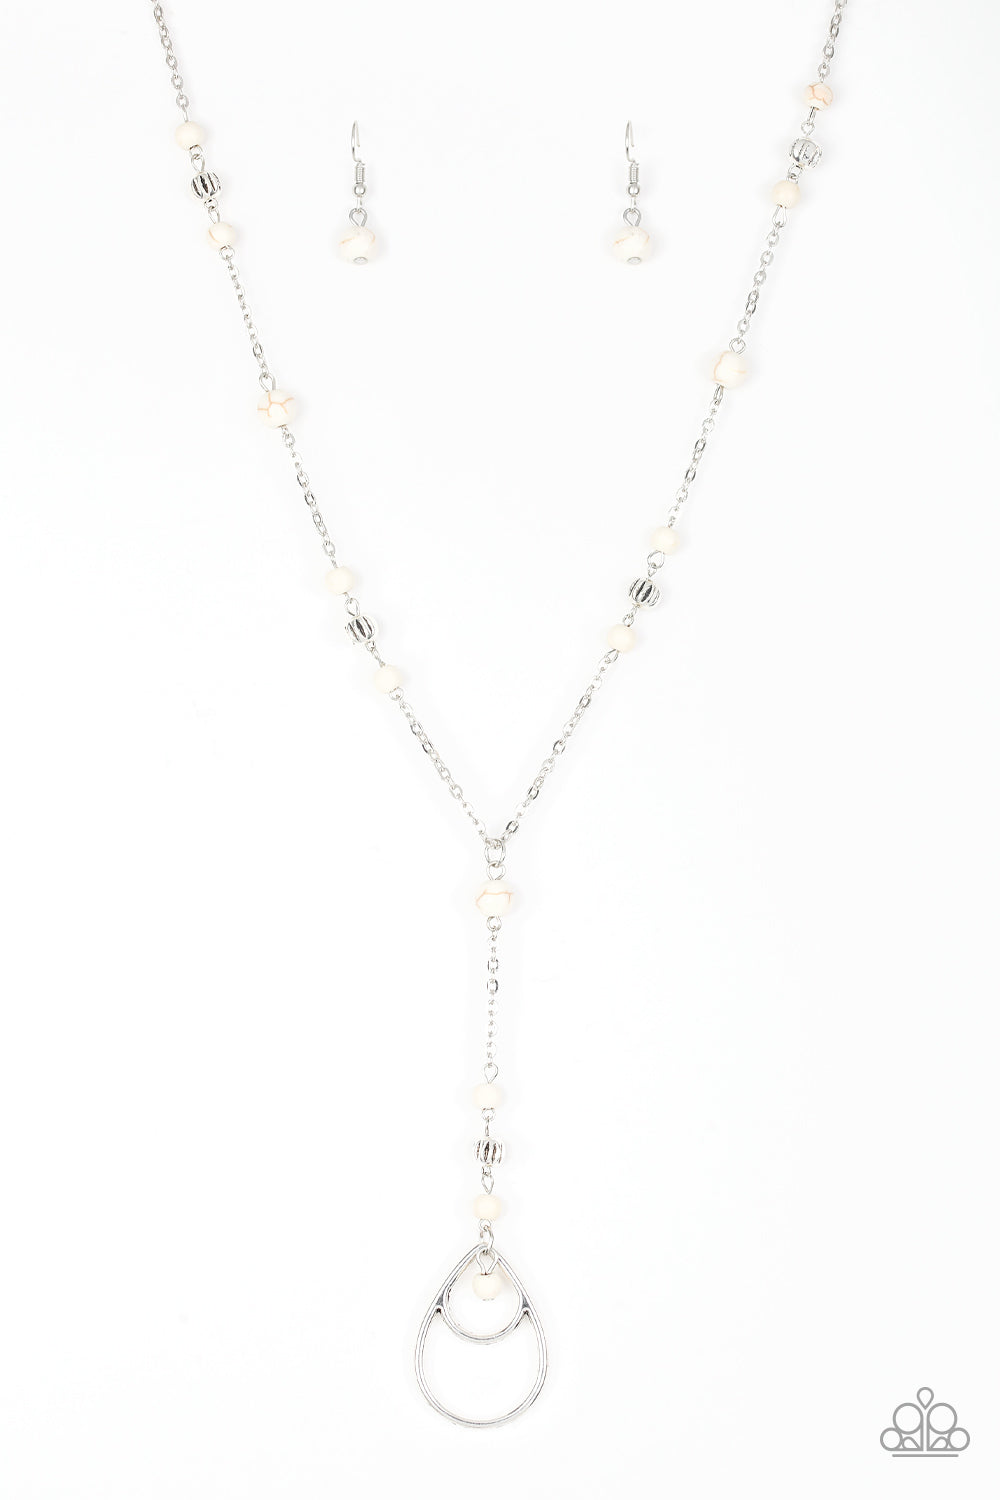 Sandstone Savannahs - White Stone and Silver Necklace - Paparazzi Accessories - Infused with ornate silver beads, earthy white stones trickle along a shimmery silver chain for a seasonal look. A glistening silver teardrop pendant swings from the bottom for a whimsical finish.